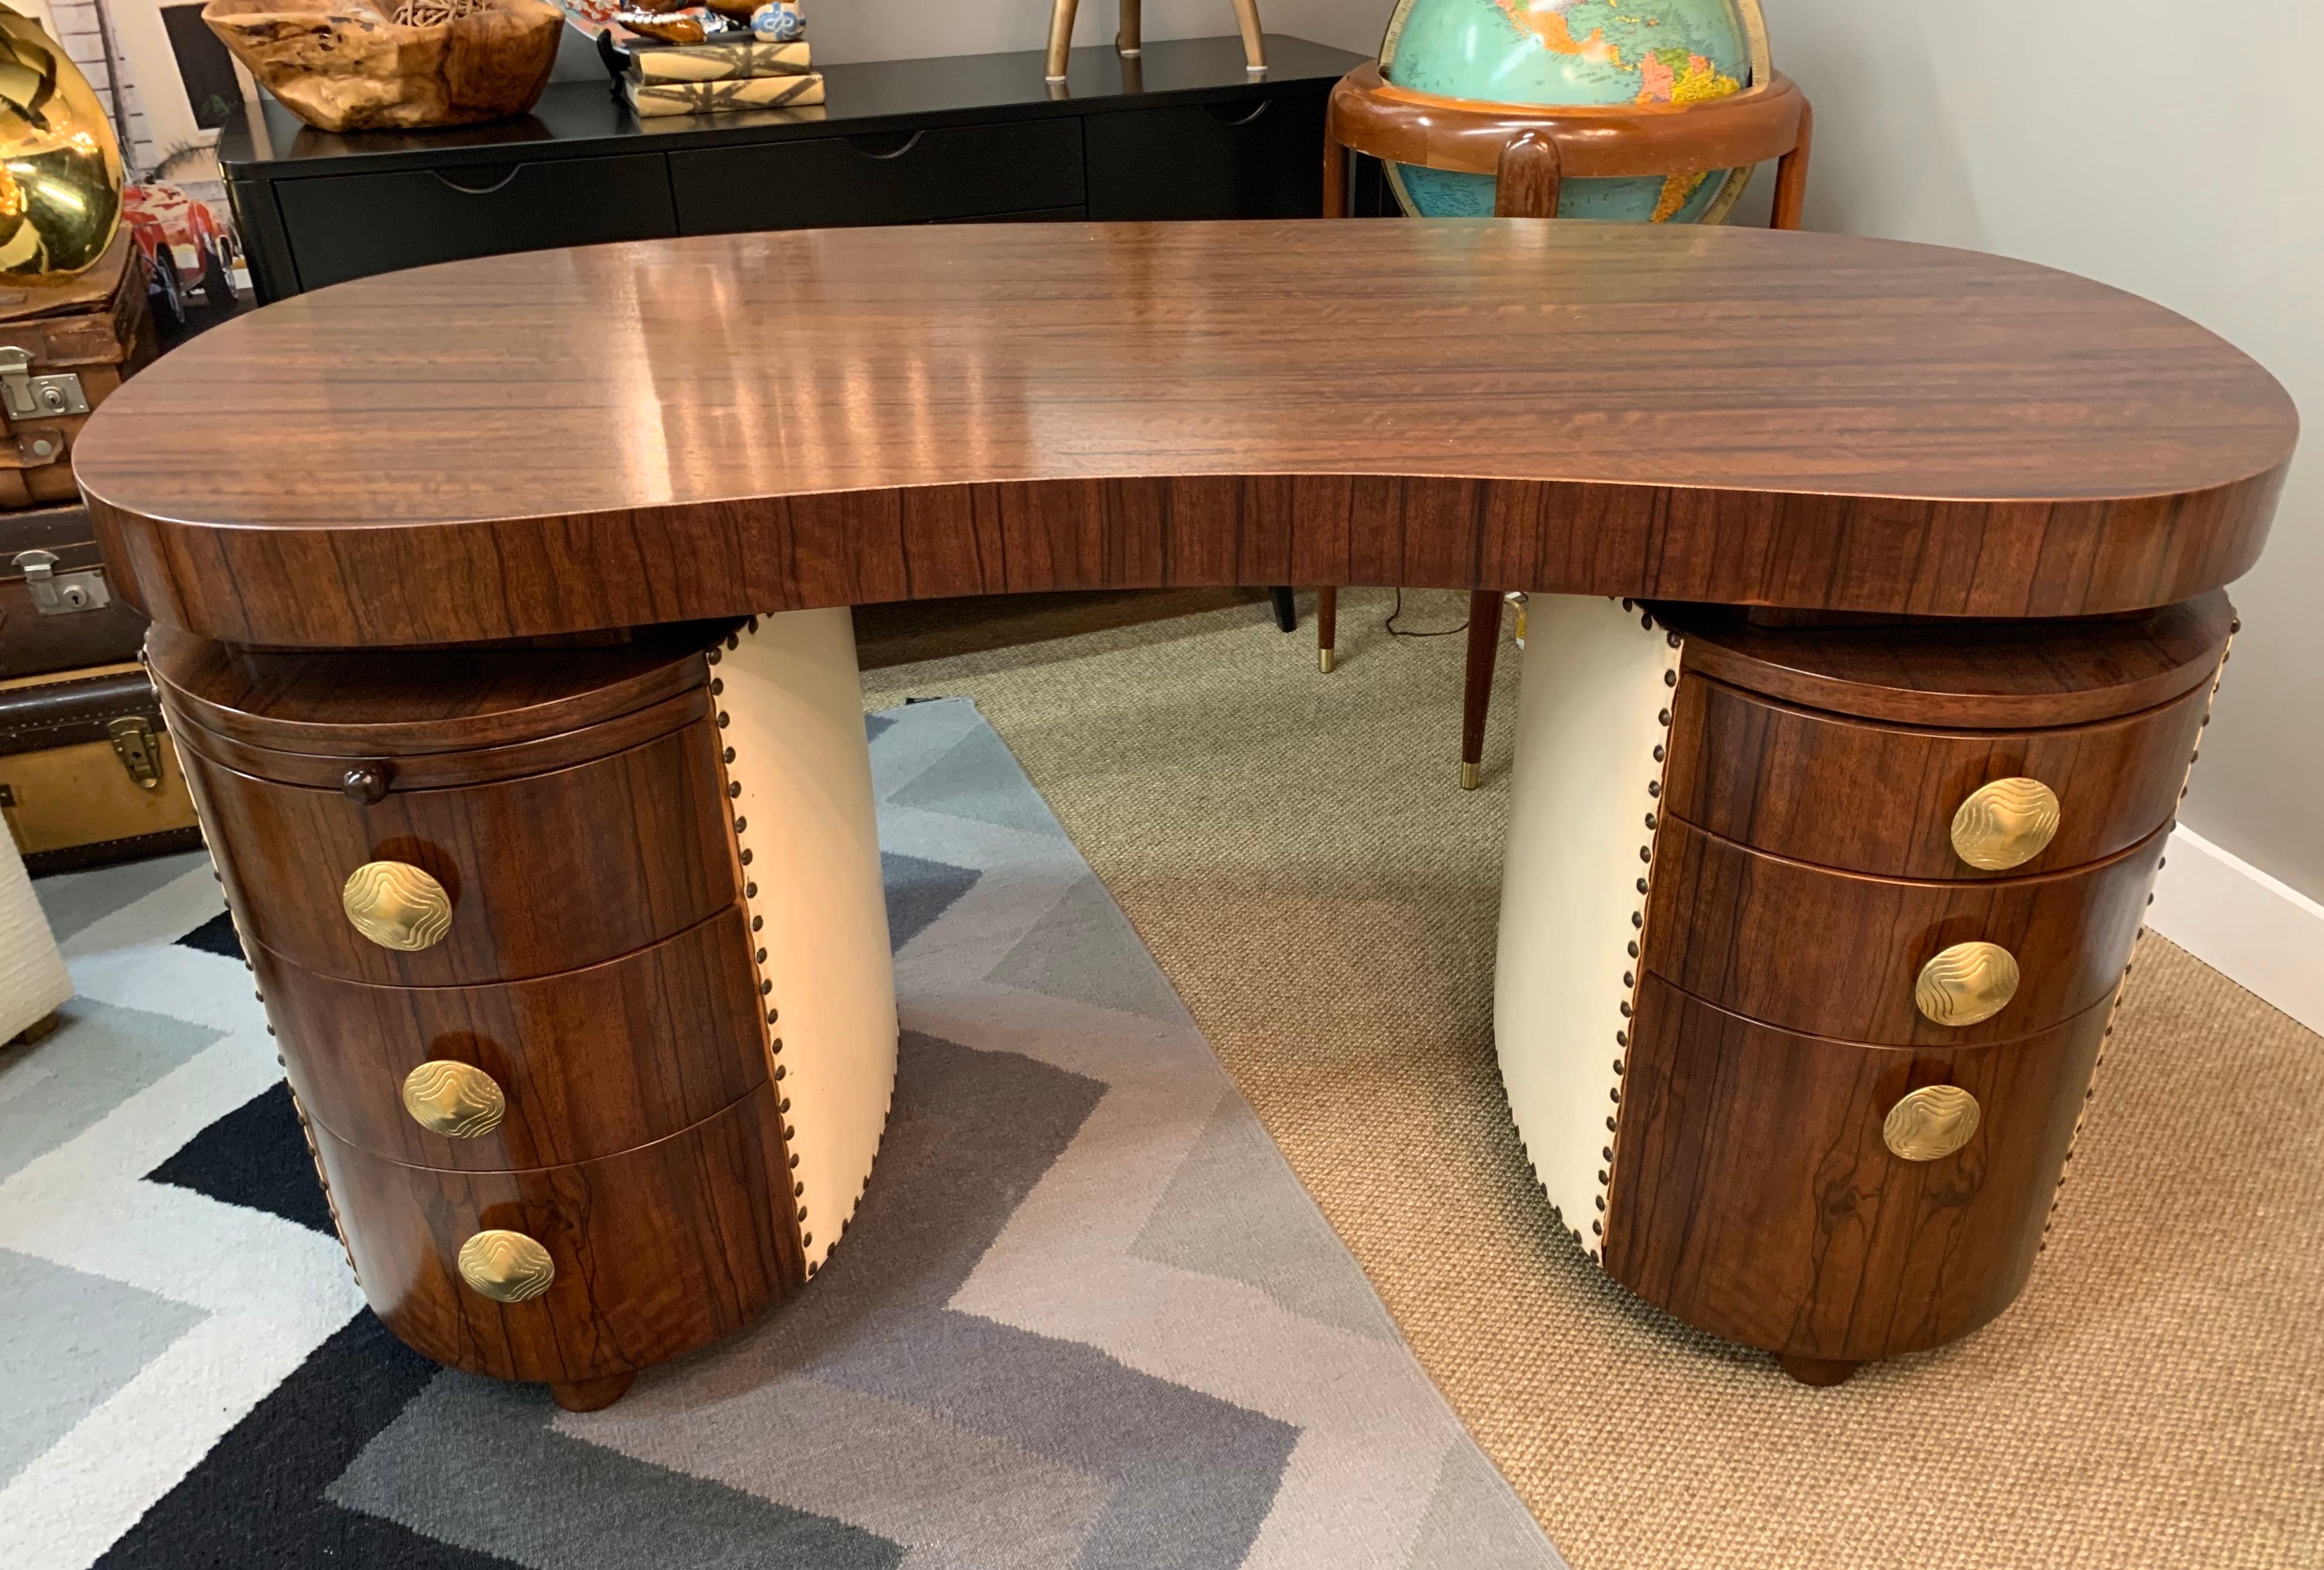 Stunning and in excellent condition, an Art Deco kidney shaped desk designed by Gilbert Rohde, circa 1940 for Herman Miller. The heavy thick top is made of exotic paldoa wood and is supported by two oval cases of drawers wrapped in a cream leather